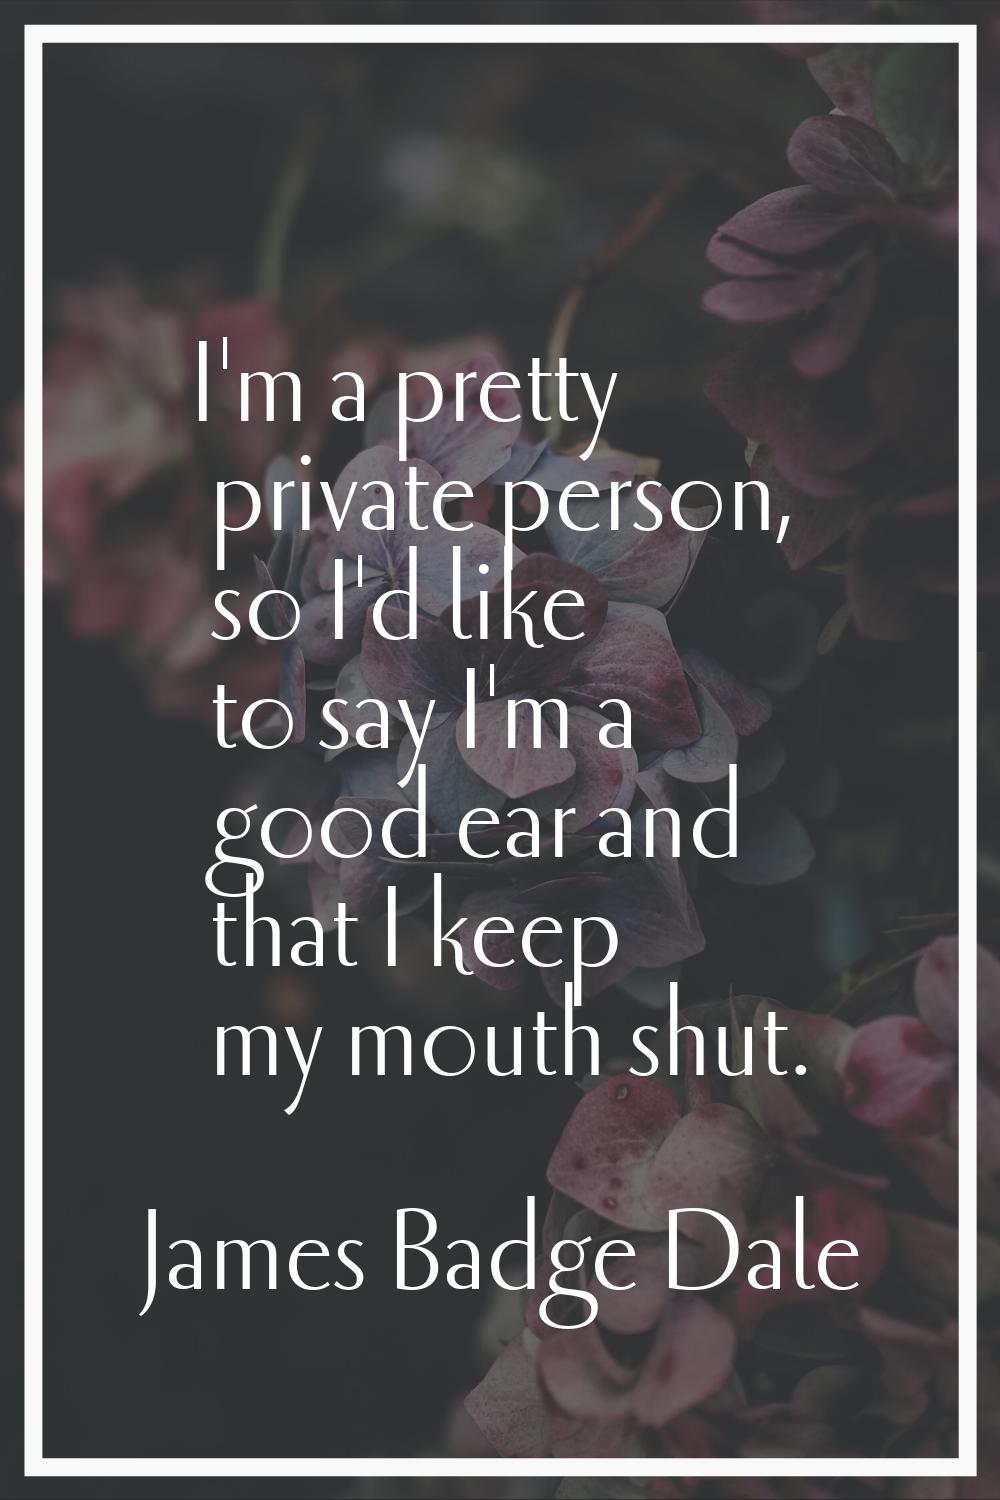 I'm a pretty private person, so I'd like to say I'm a good ear and that I keep my mouth shut.